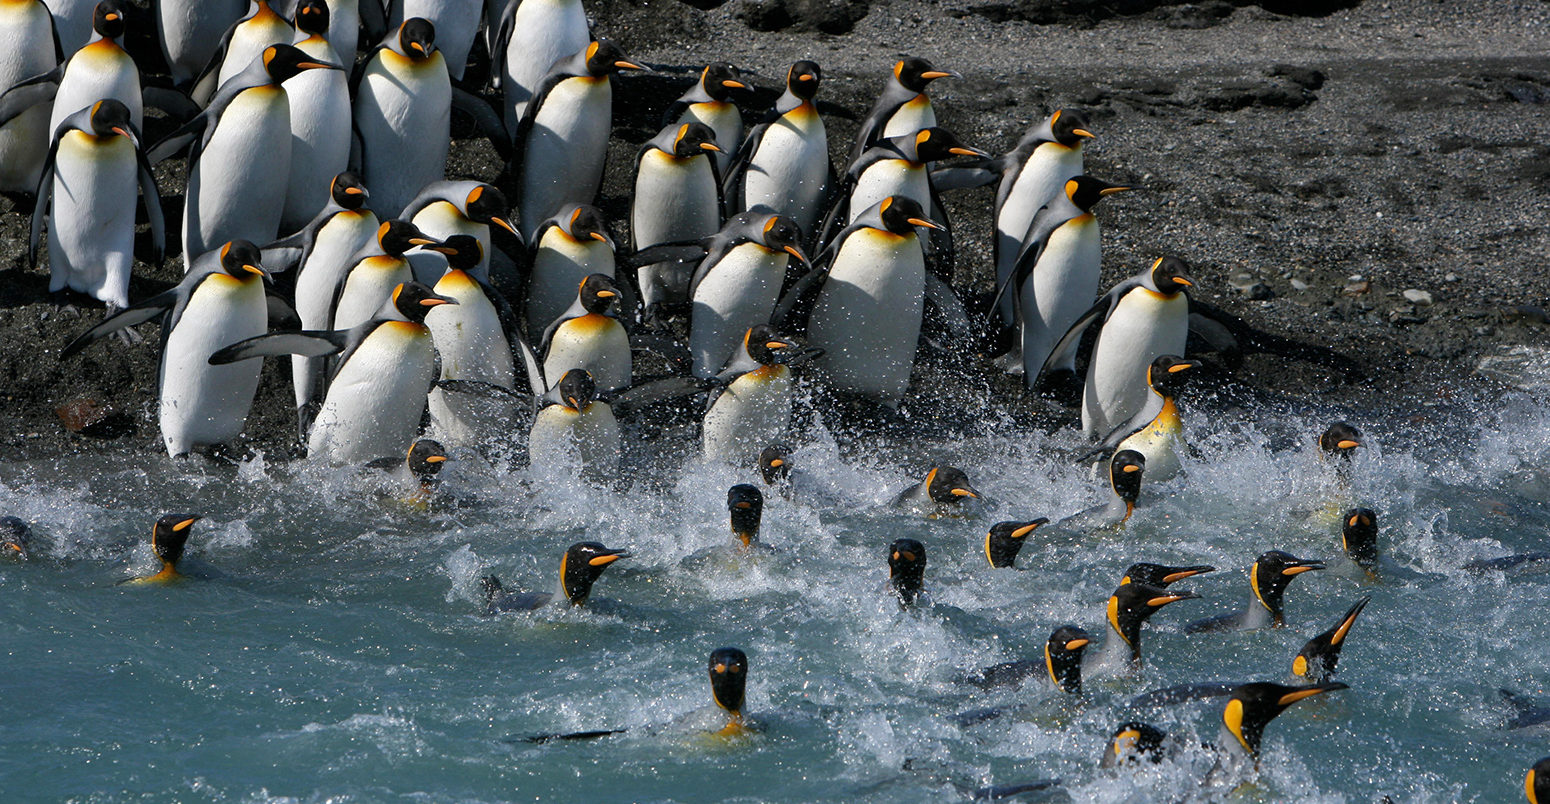 E462PE King penguins (Aptenodytes patagonicus) crossing water to reach breeding site, South Georgia. Taken on location for BBC Frozen Planet series, 2008.